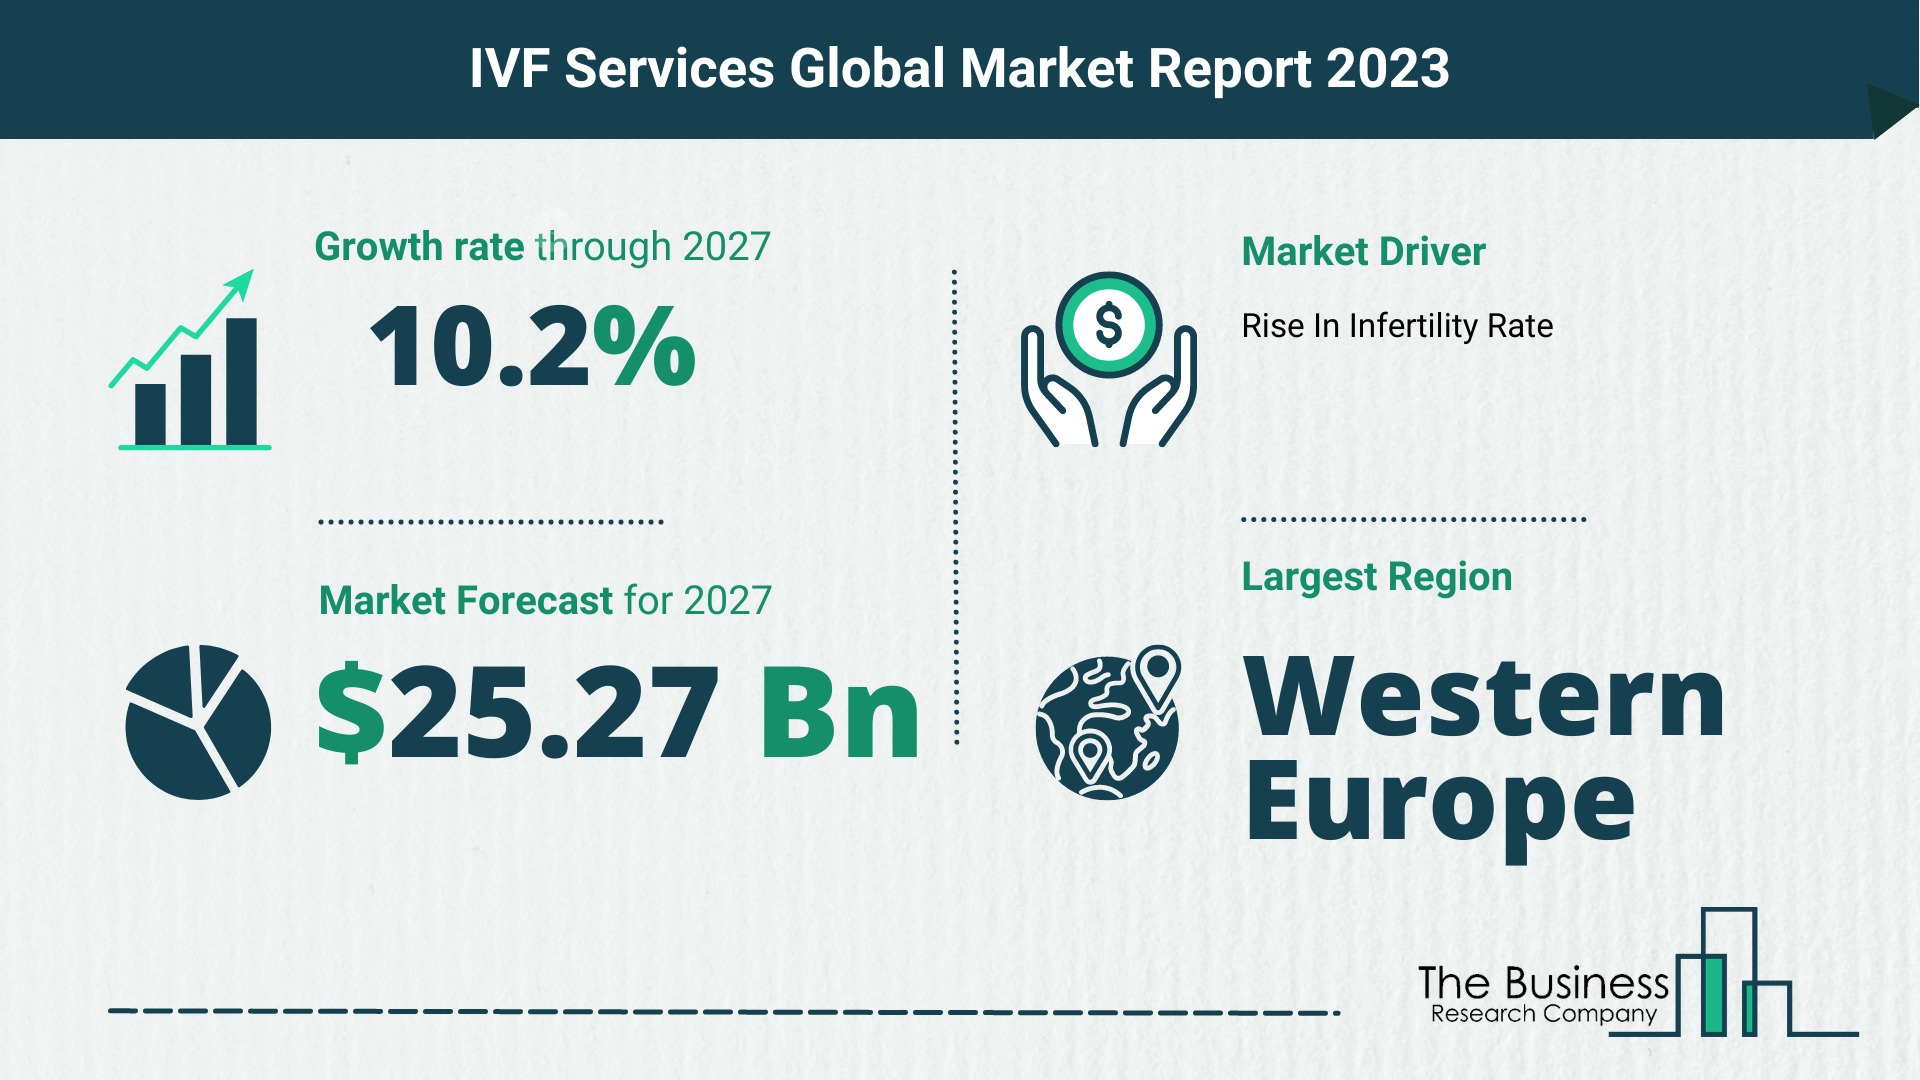 IVF Services Market Size, Share, And Growth Rate Analysis 2023